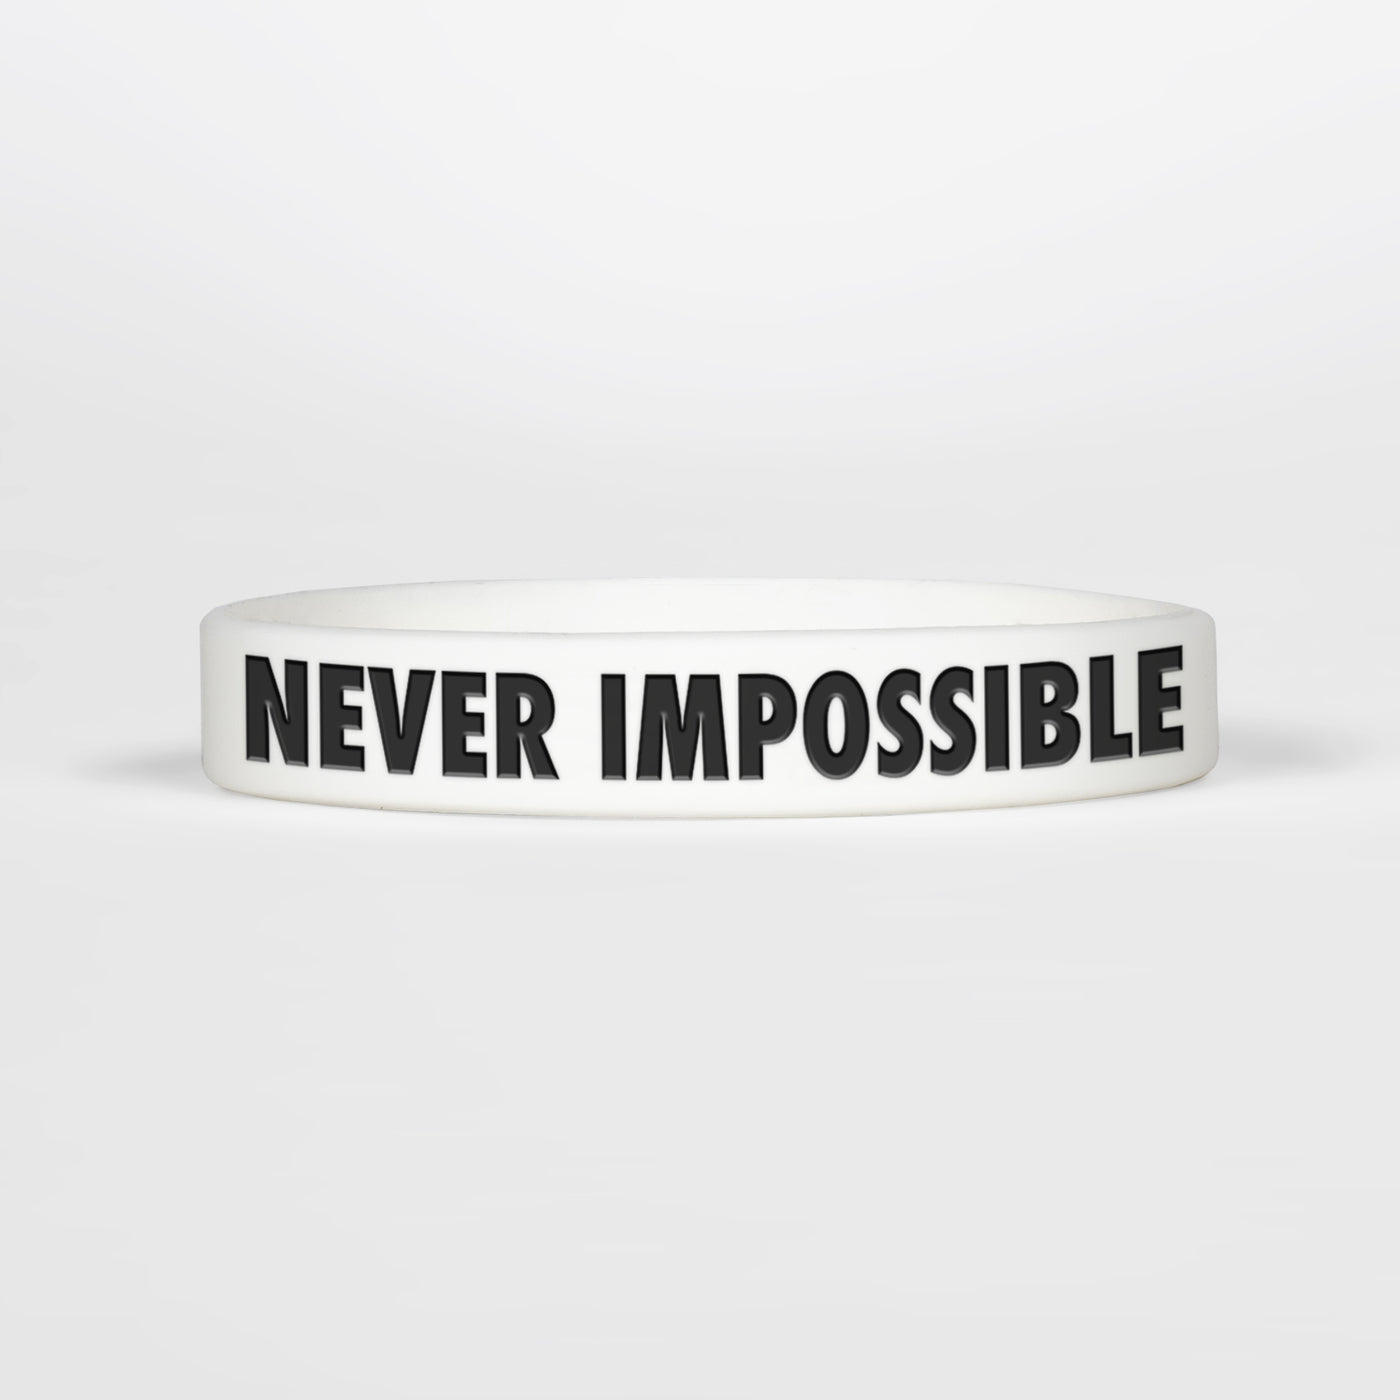 Never Impossible Motivational Wristband